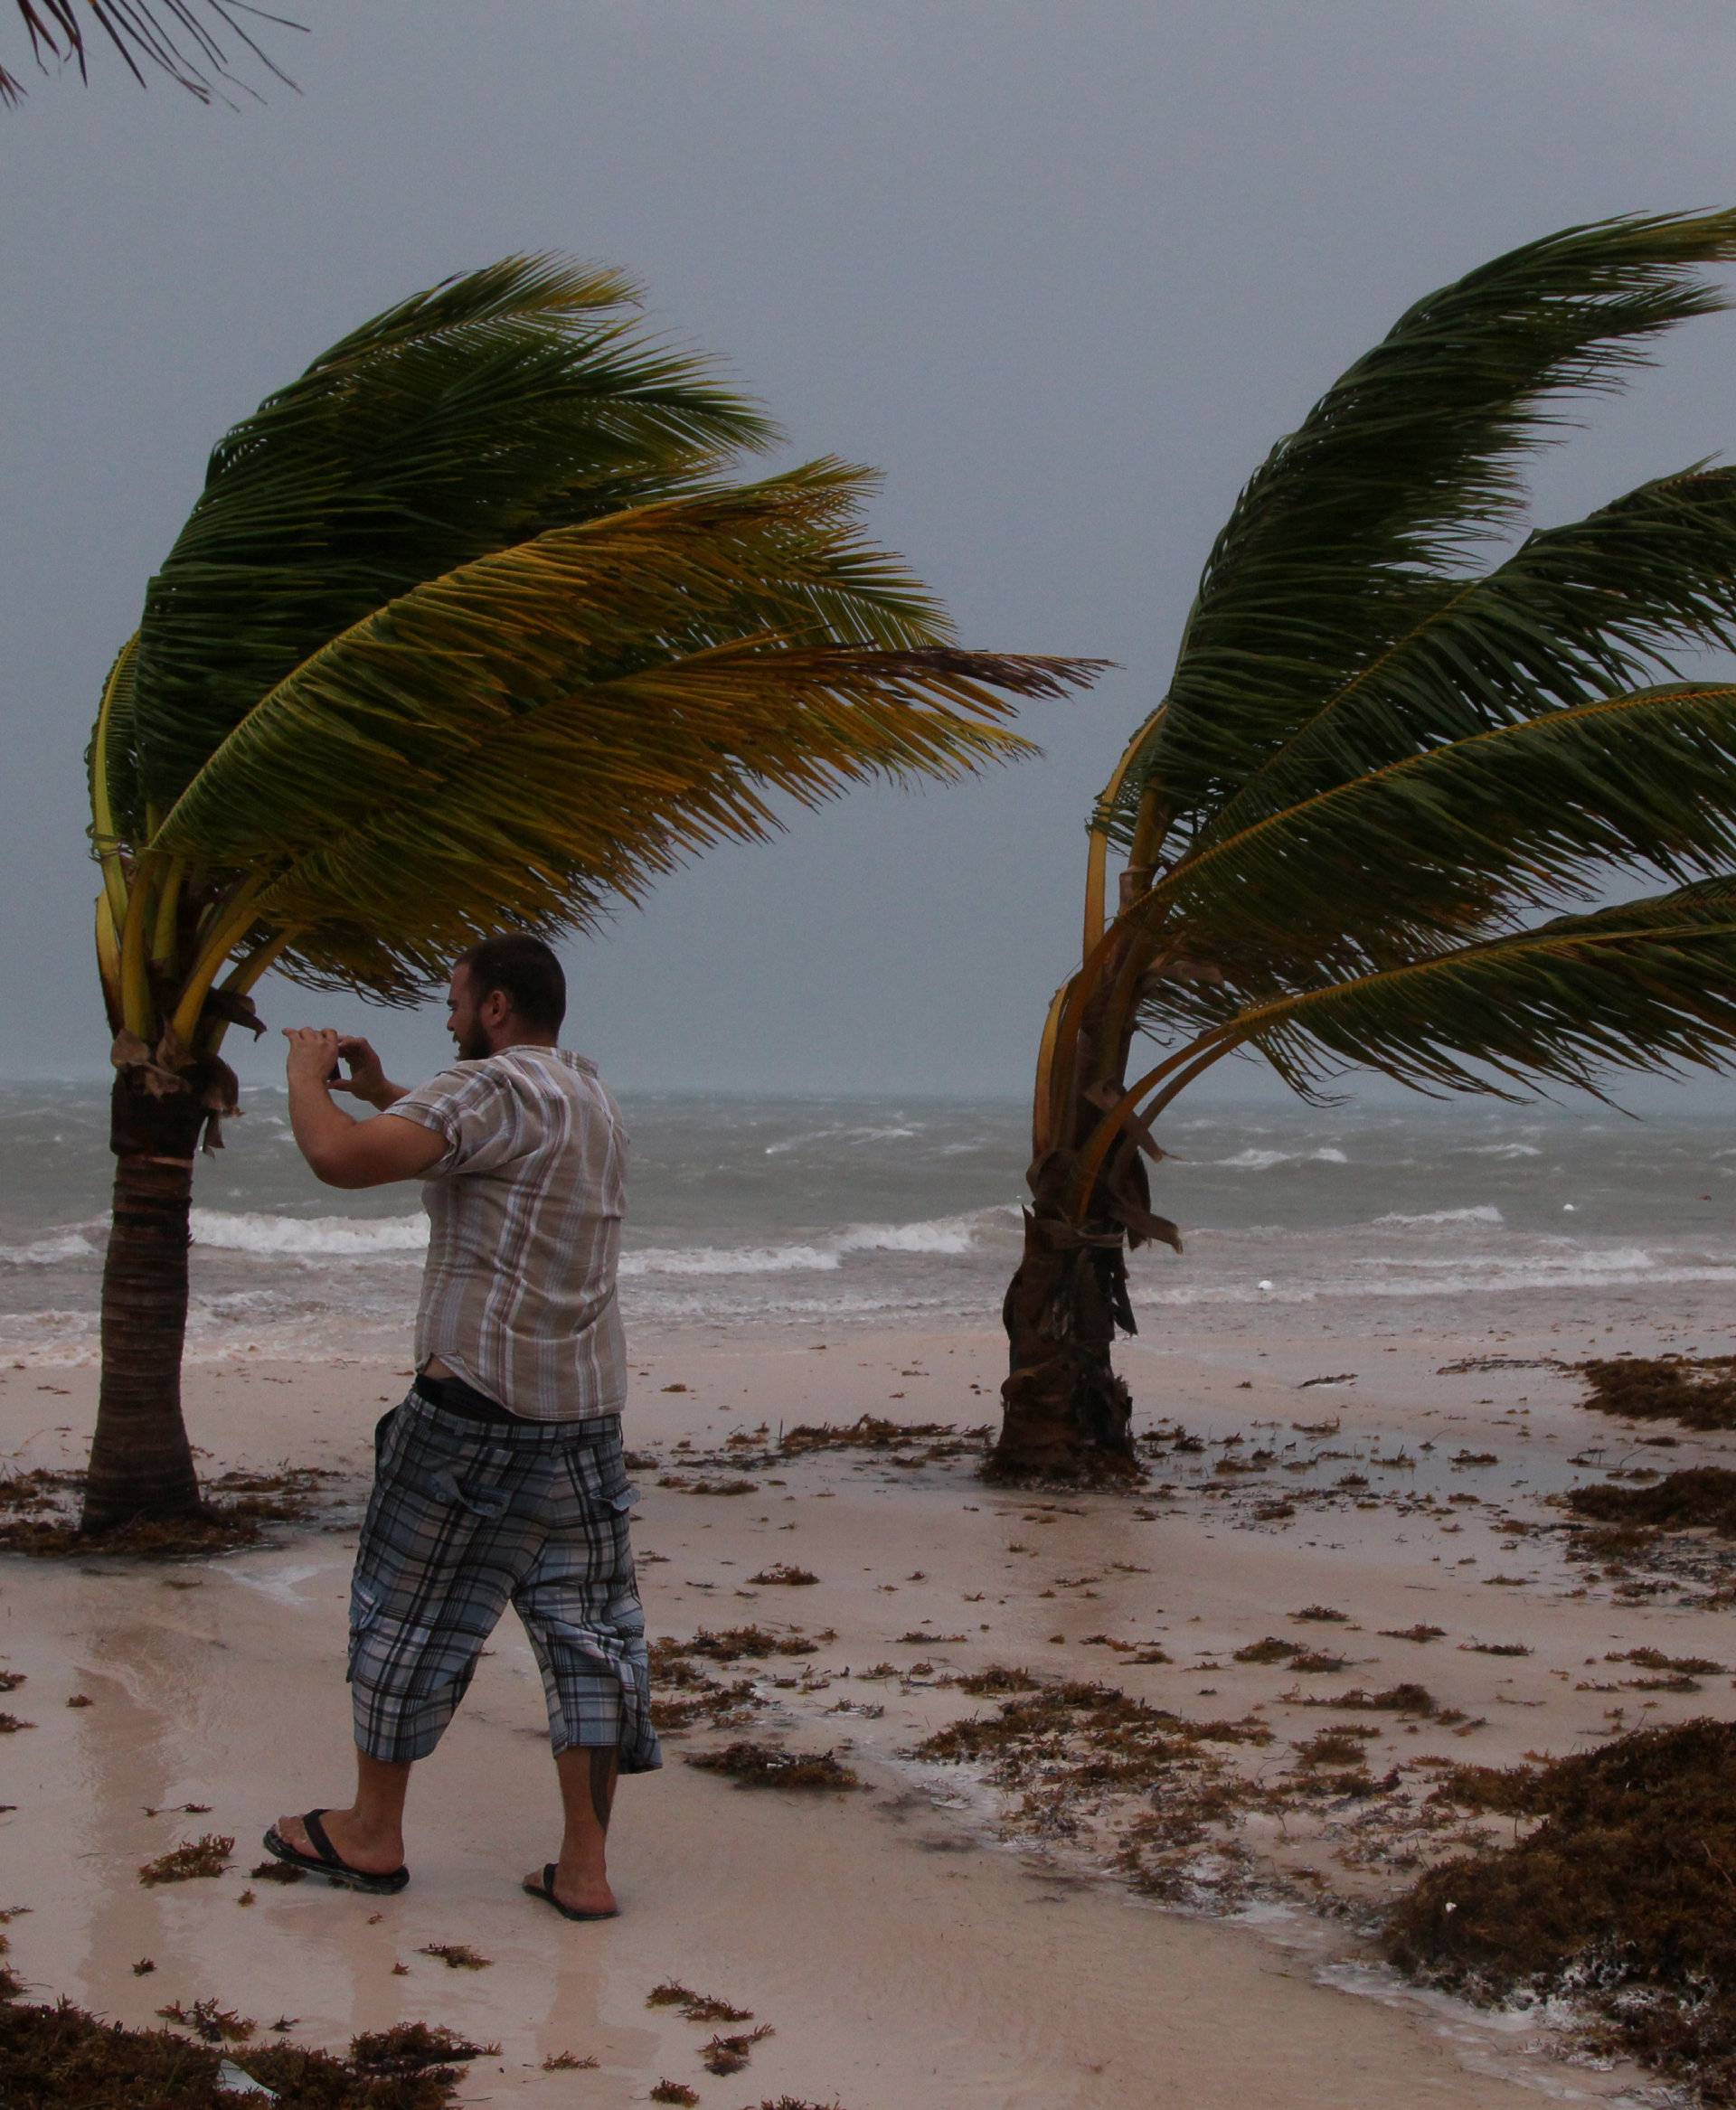 A man photographs the waves before the arrival of Hurricane Maria in Punta Cana